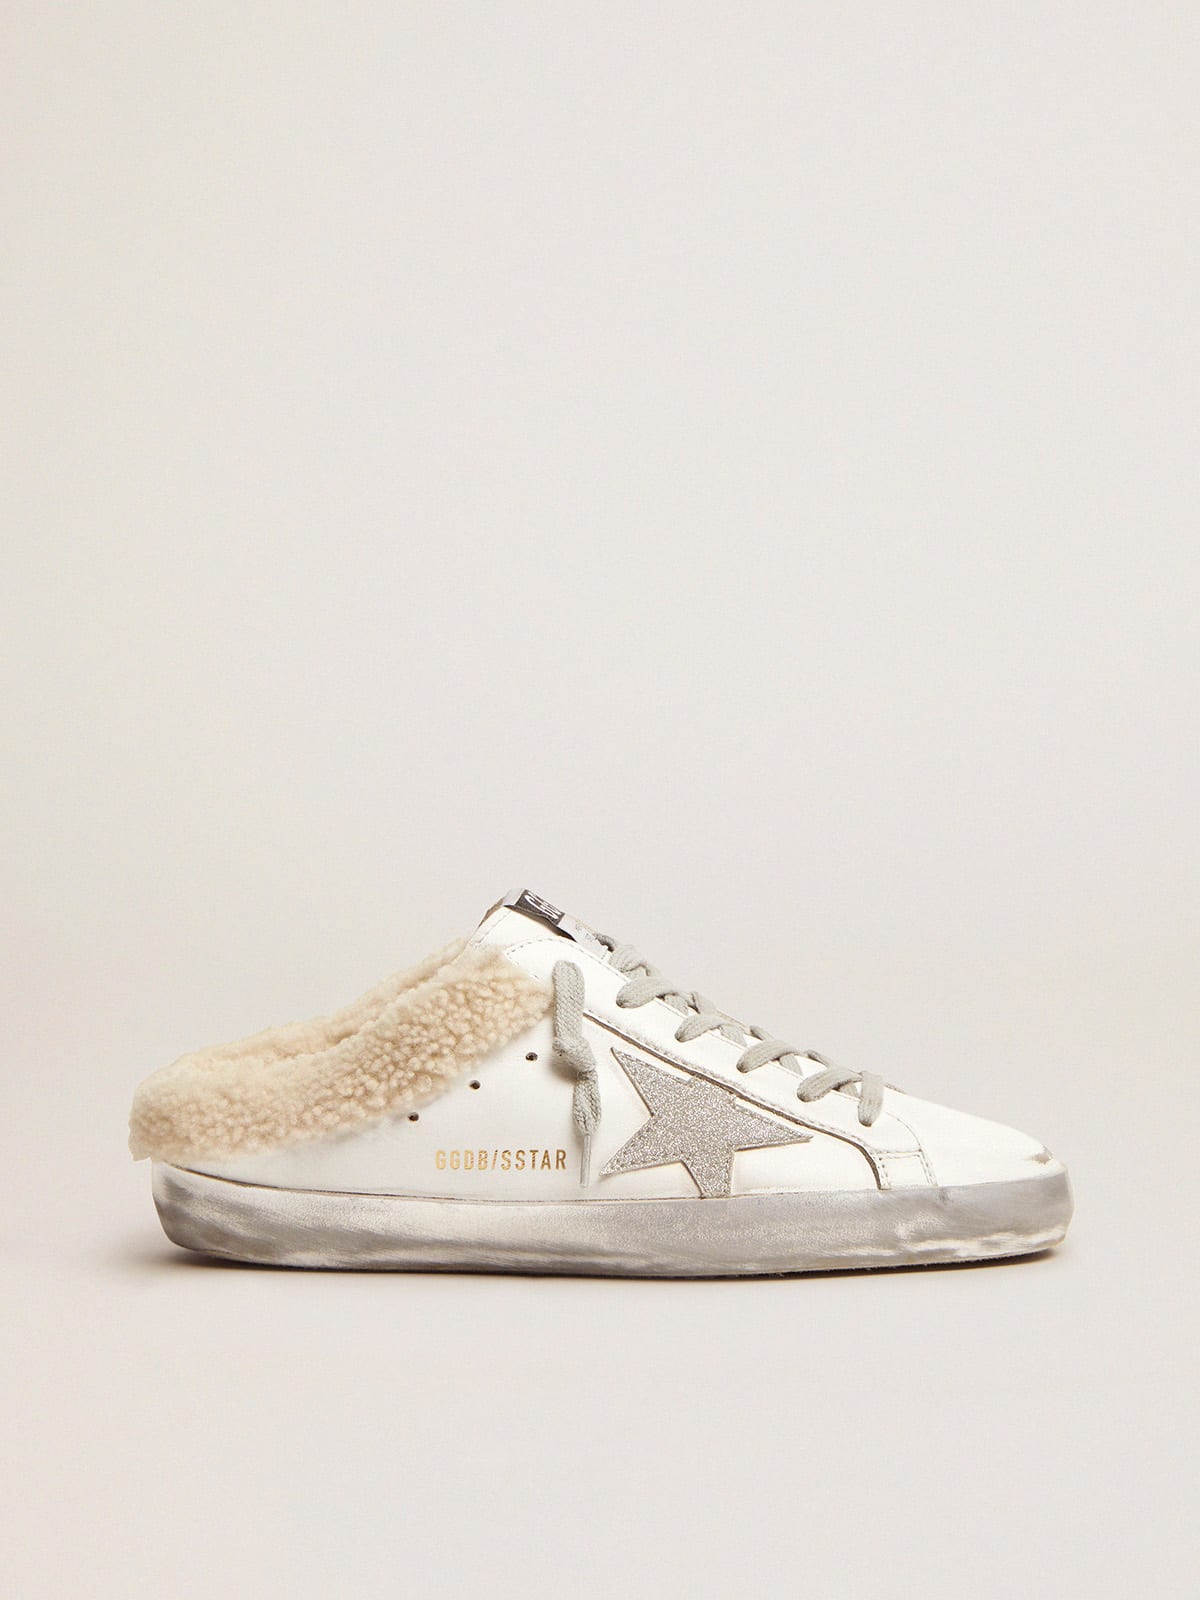 Golden Goose - Super-Star Sabots in white leather with shearling lining in 